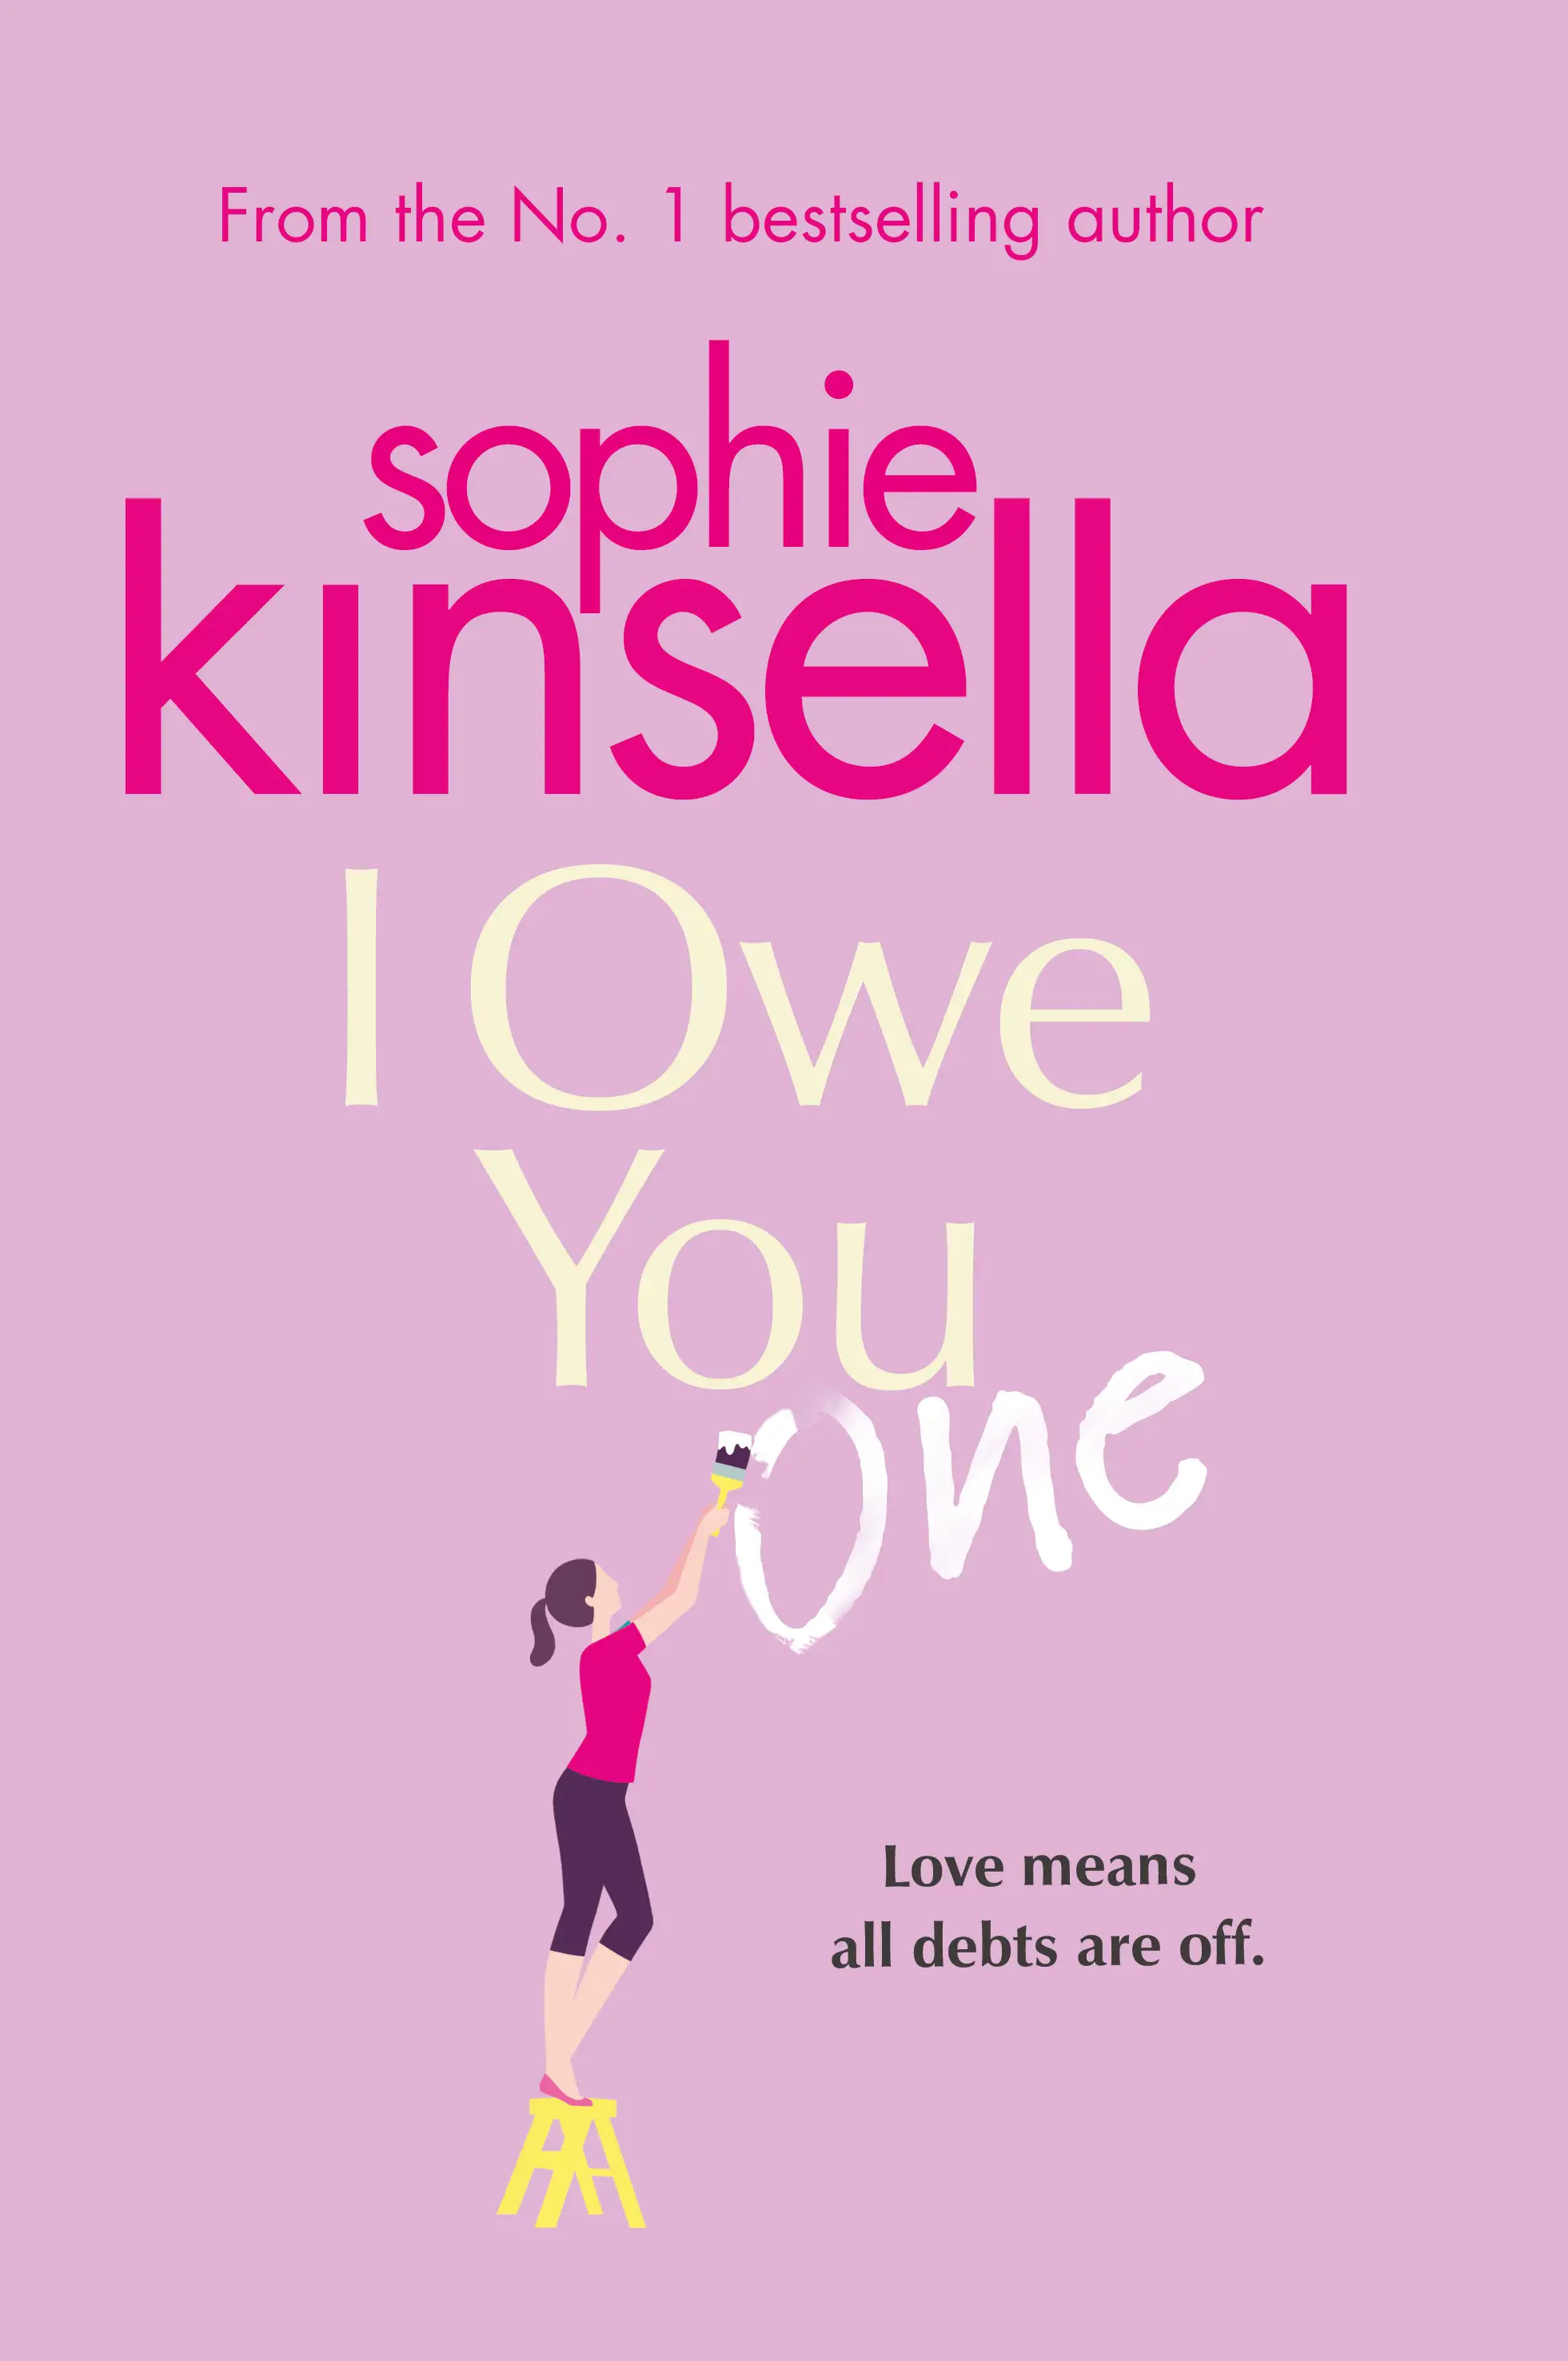 Cover of I Owe You One